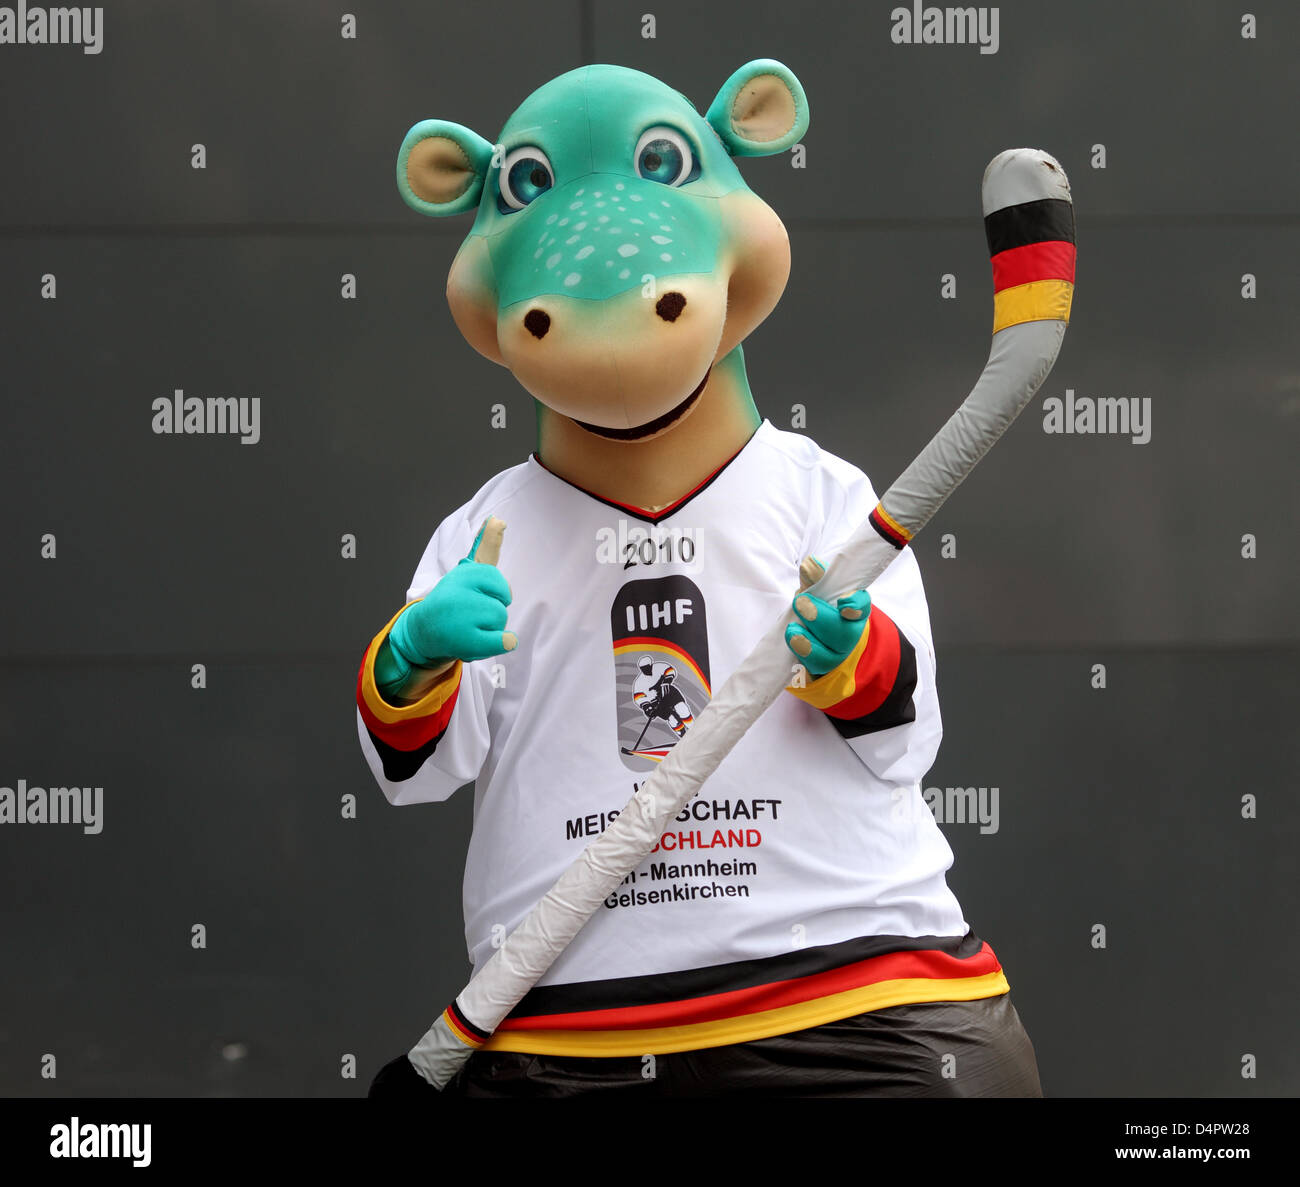 ?Urmel on the Ice? (?Urmel auf dem Eis?) the mascot for the Ice Hockey World Championships 2010 in Germany poses during a photo call promoting the championships in Cologne, Germany, 02 September 2009. The Ice Hockey World Championships 2010 will take place in Germany from 07 May to 23 May 2010. Photo: Felix Heyder Stock Photo